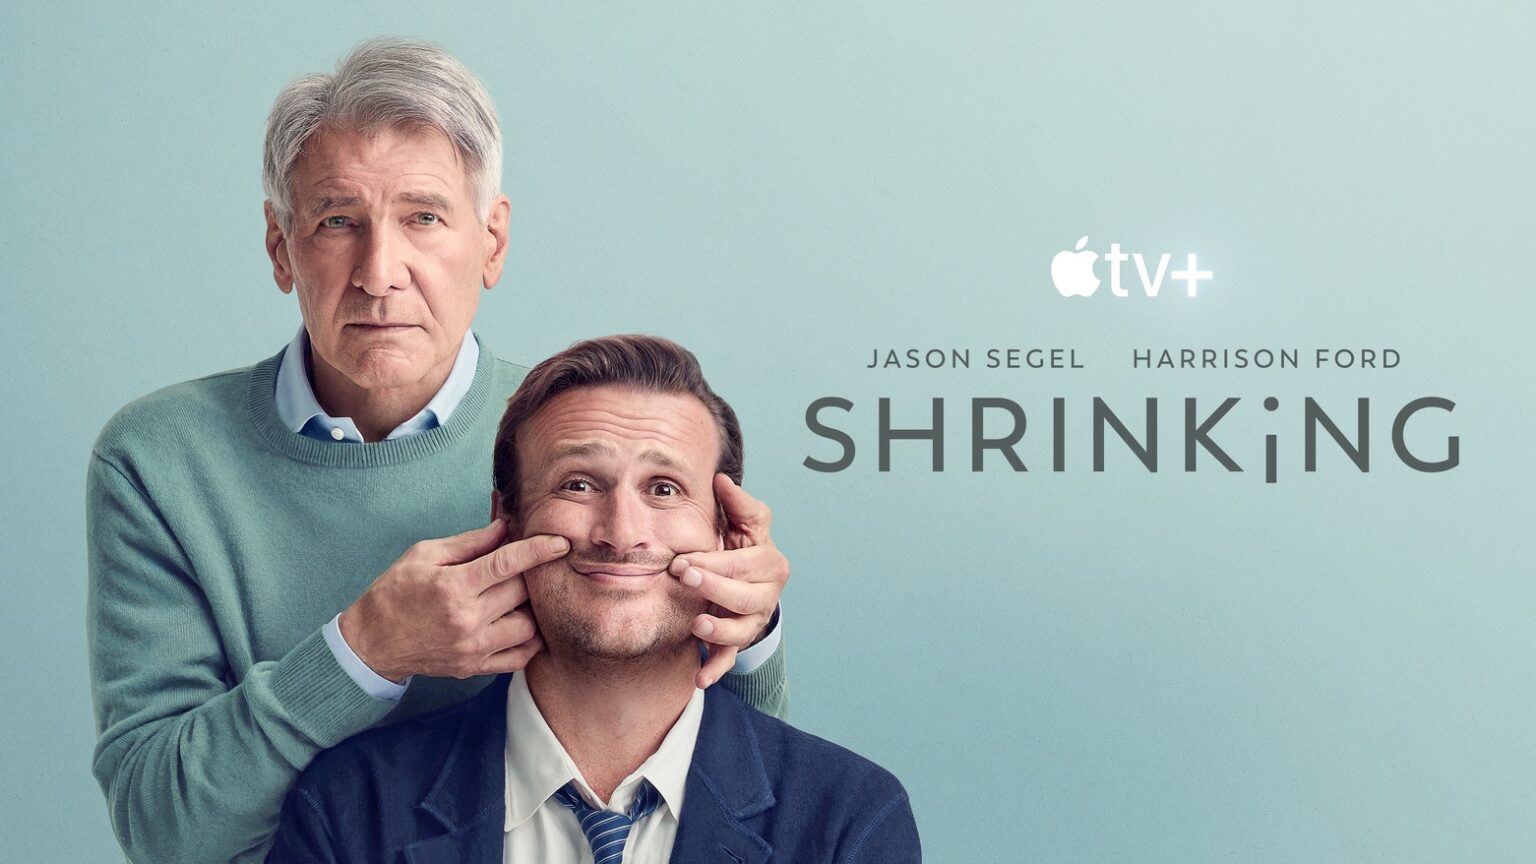 'Shrinking' is a big hit for Apple TV+.